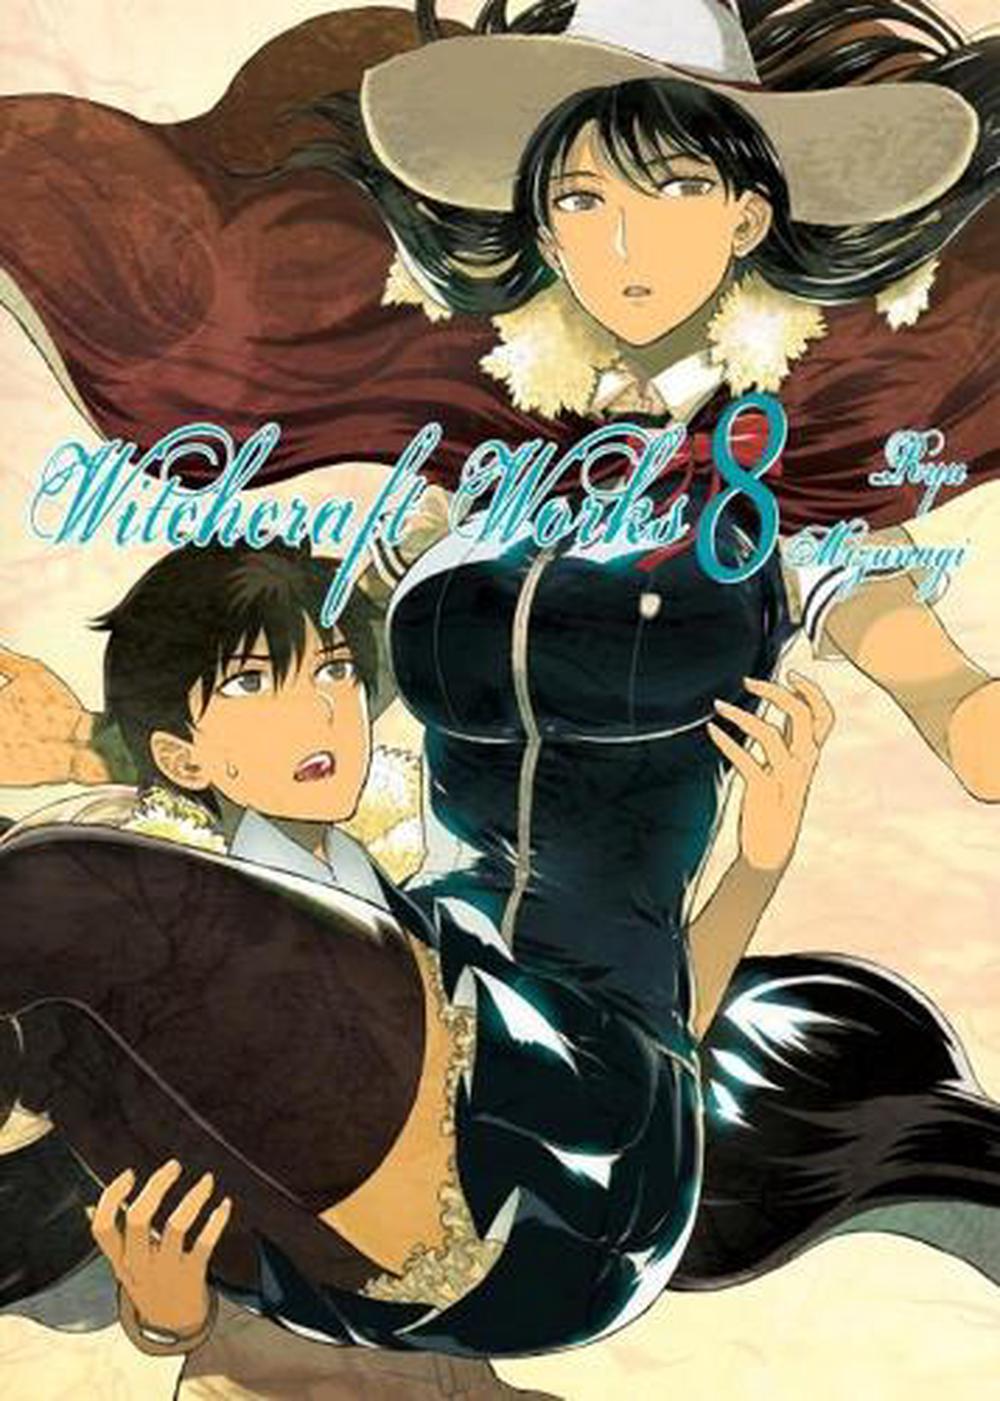 Witchcraft Works Volume 8 By Ryu Mizunagi Paperback Buy Online At The Nile